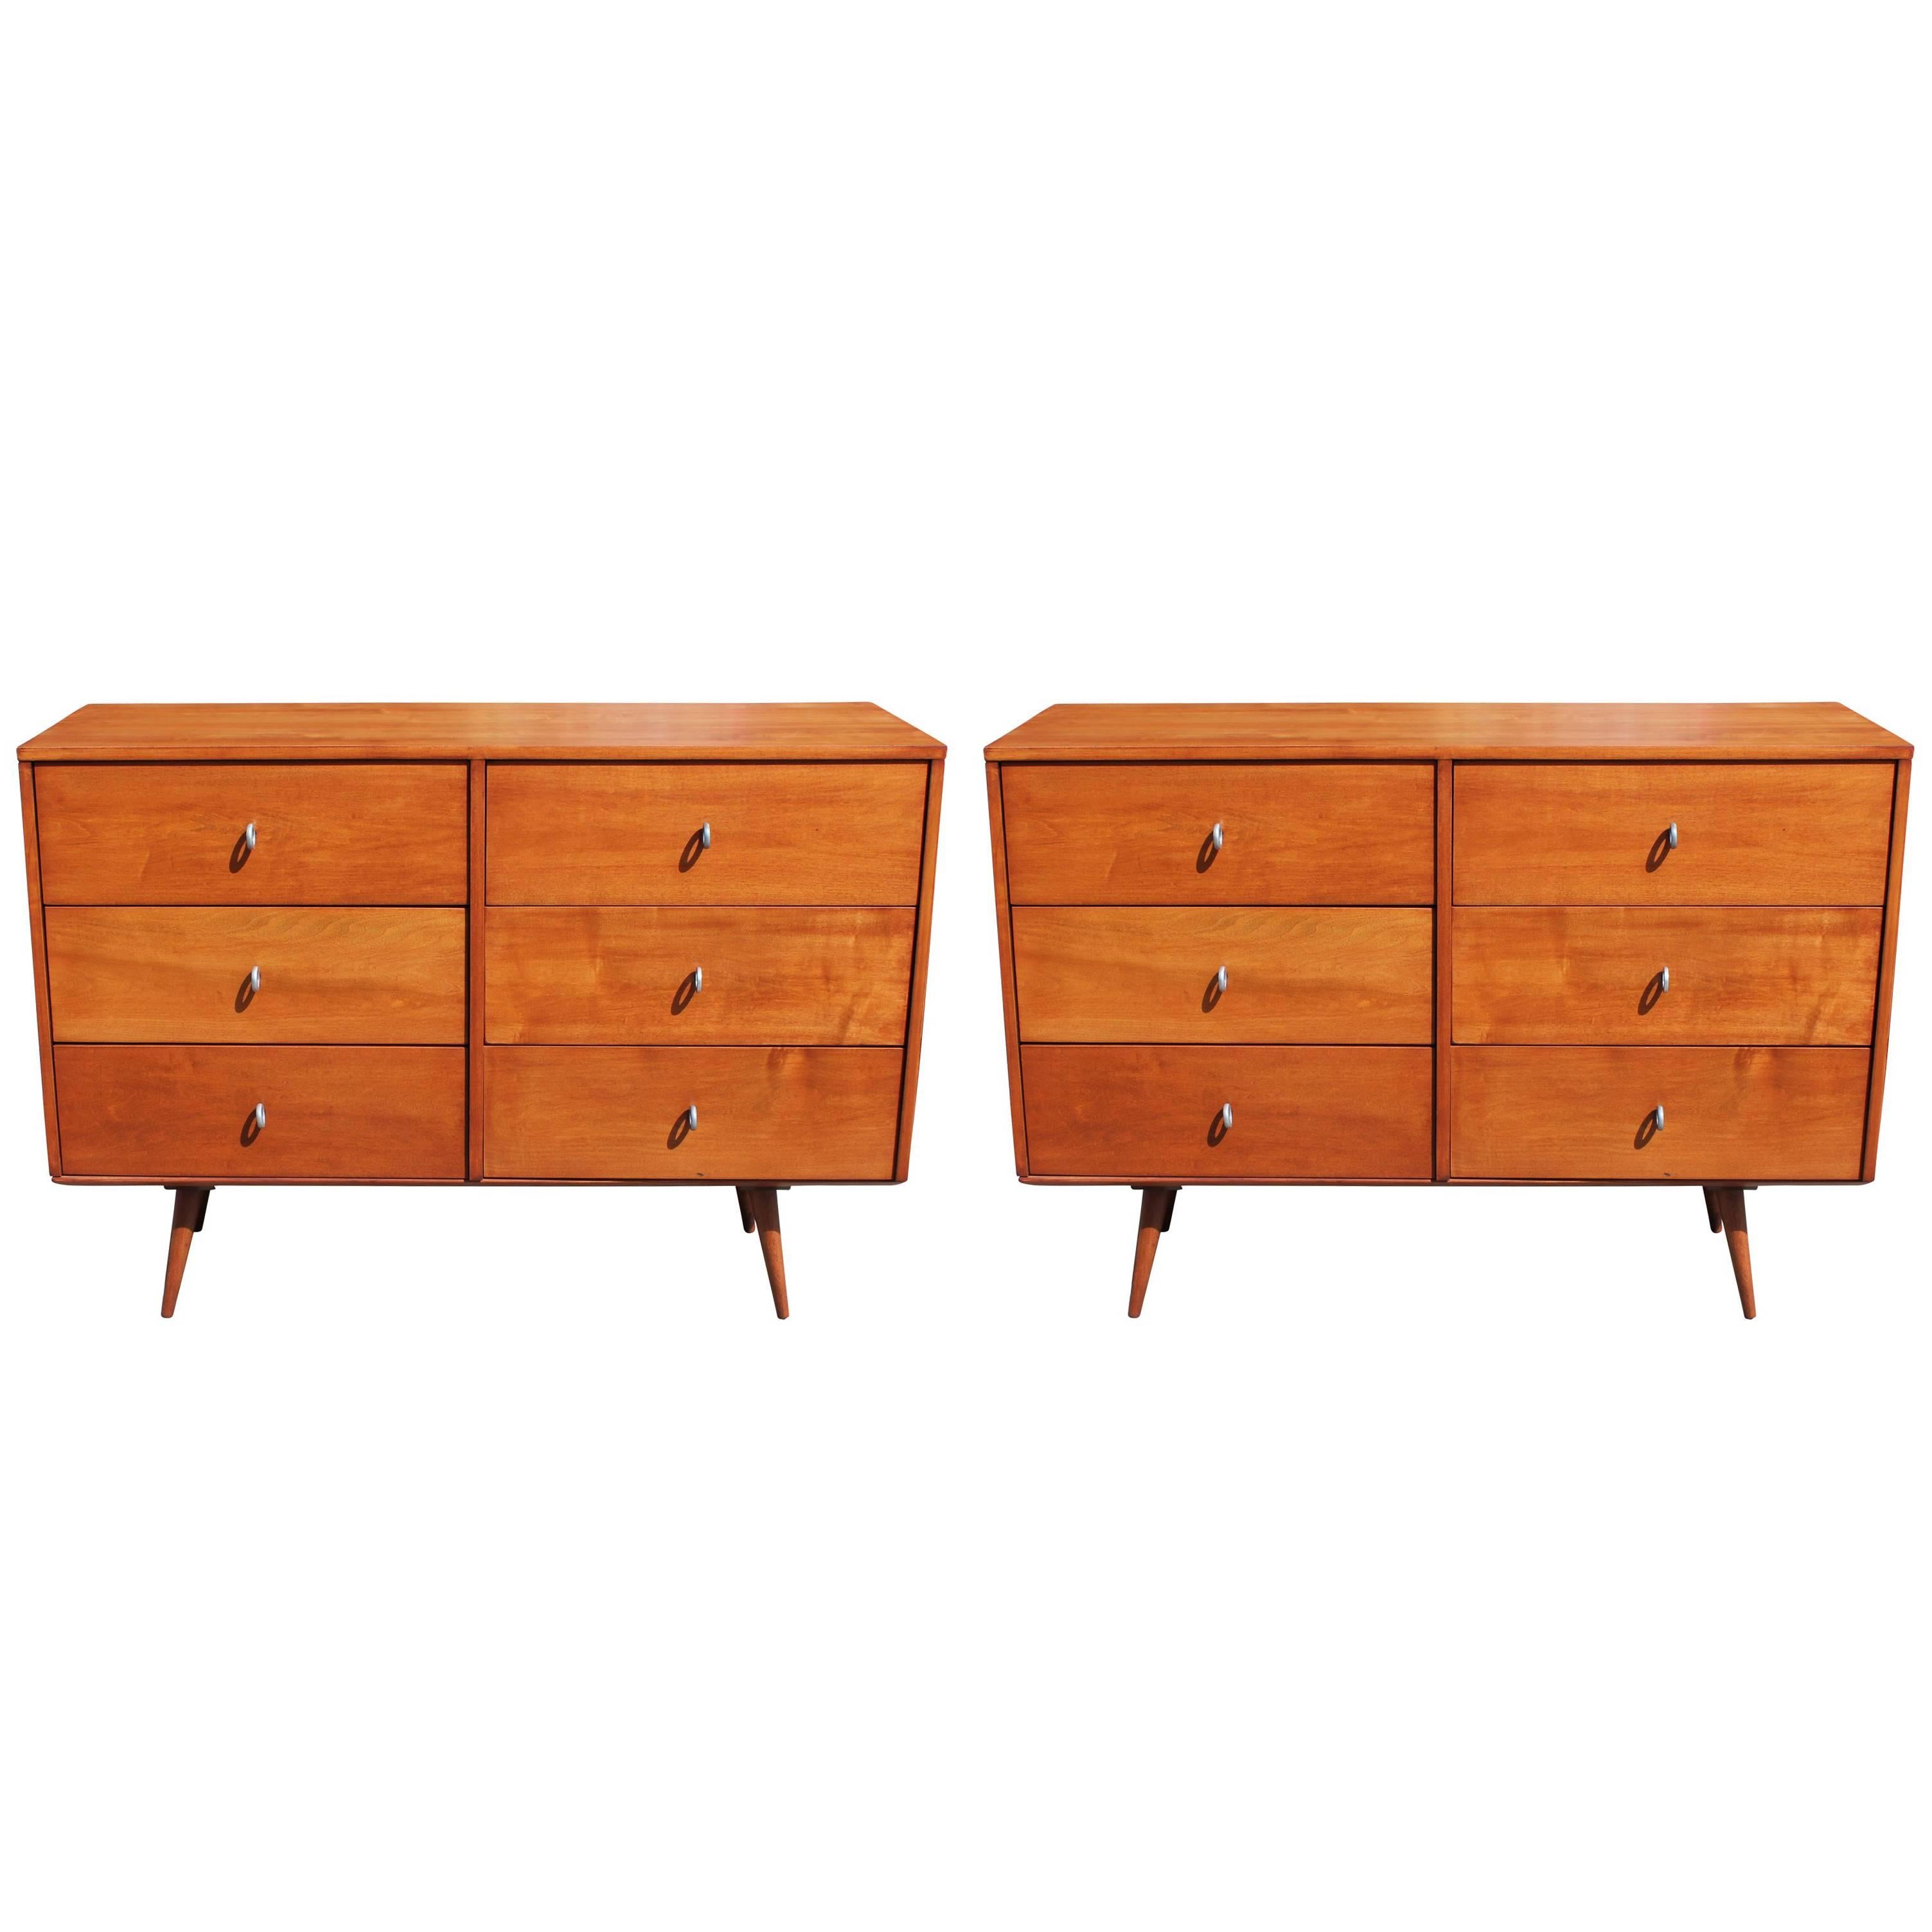 Pair of Modern Paul McCobb for Planner Group Six-Drawer Maple Dressers or Chests